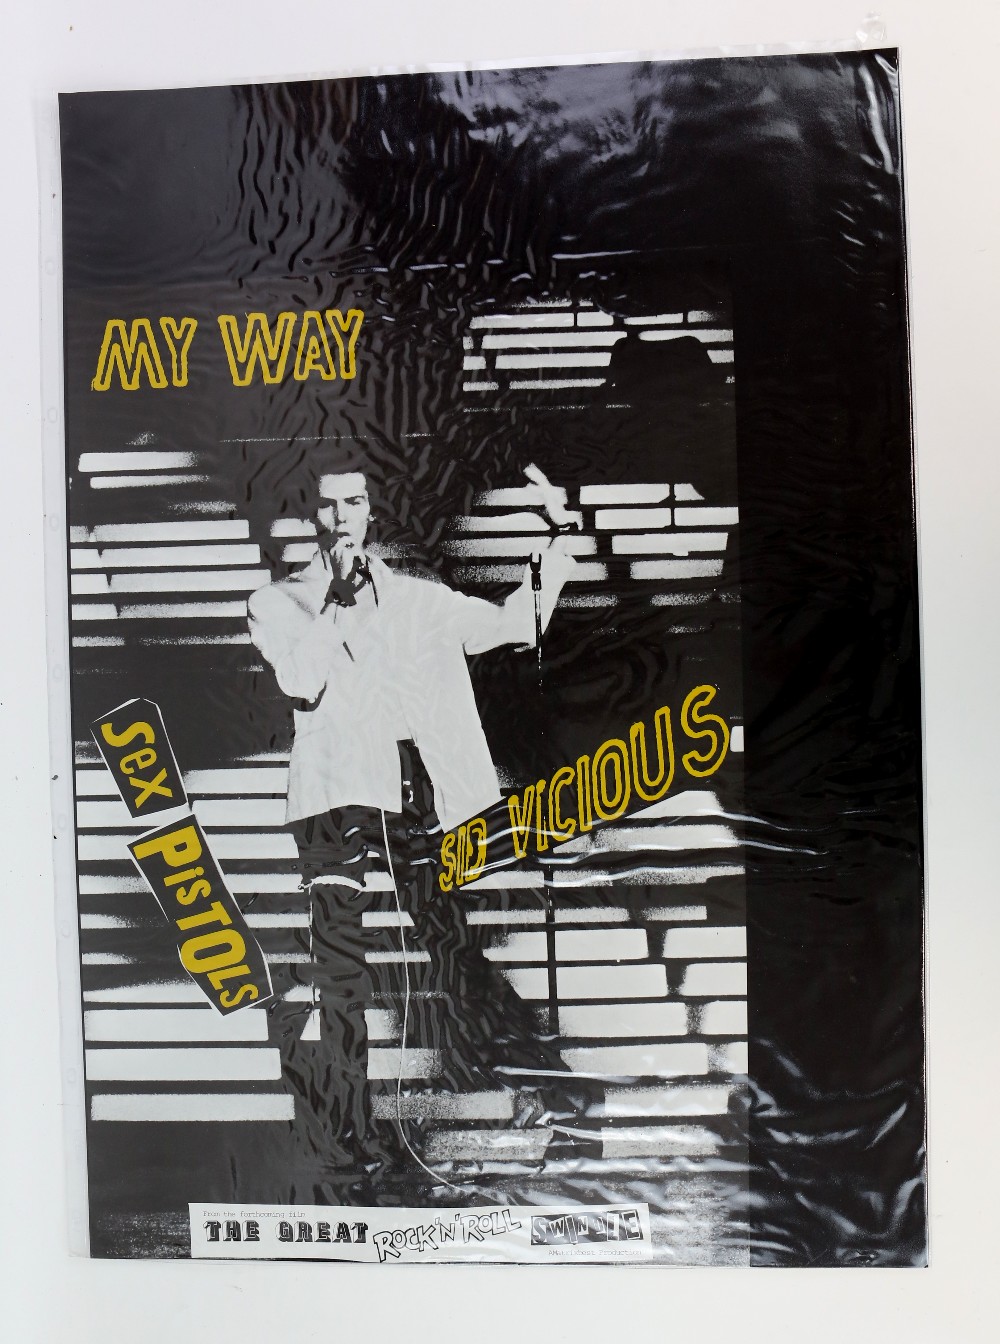 Sex Pistols, Sid Vicious My Way Poster from 1979, Amatrixbest Production, reading From the